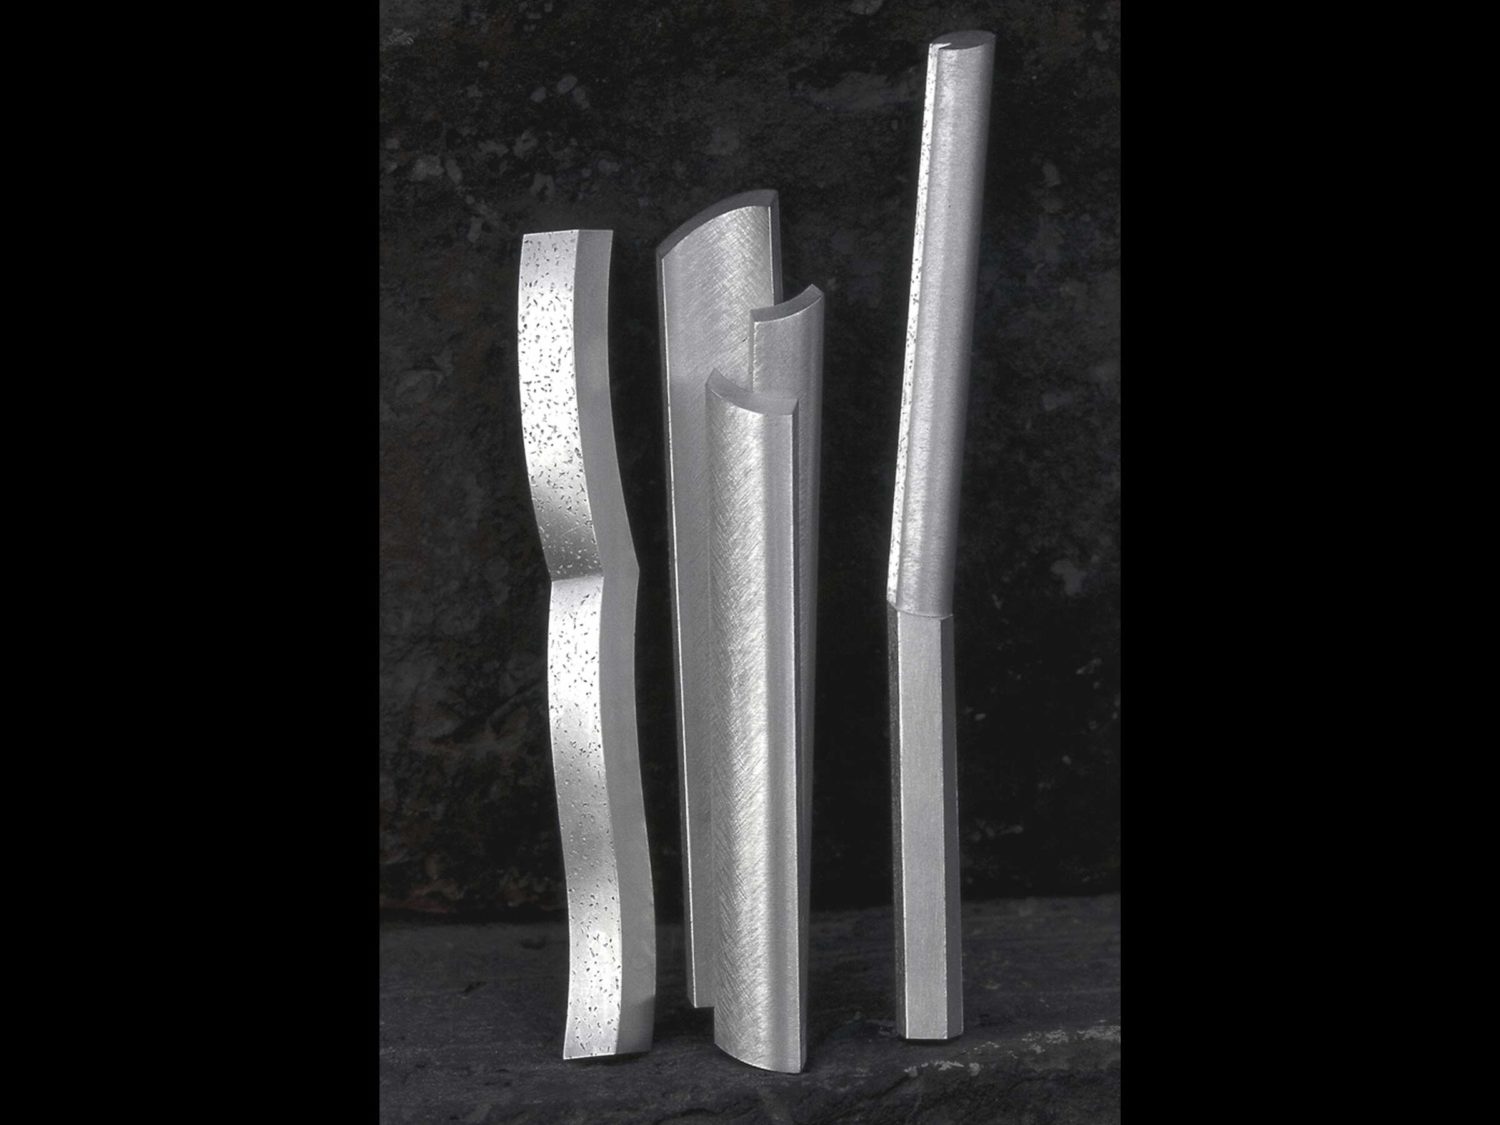 Three brooches, silver, 1997/2000